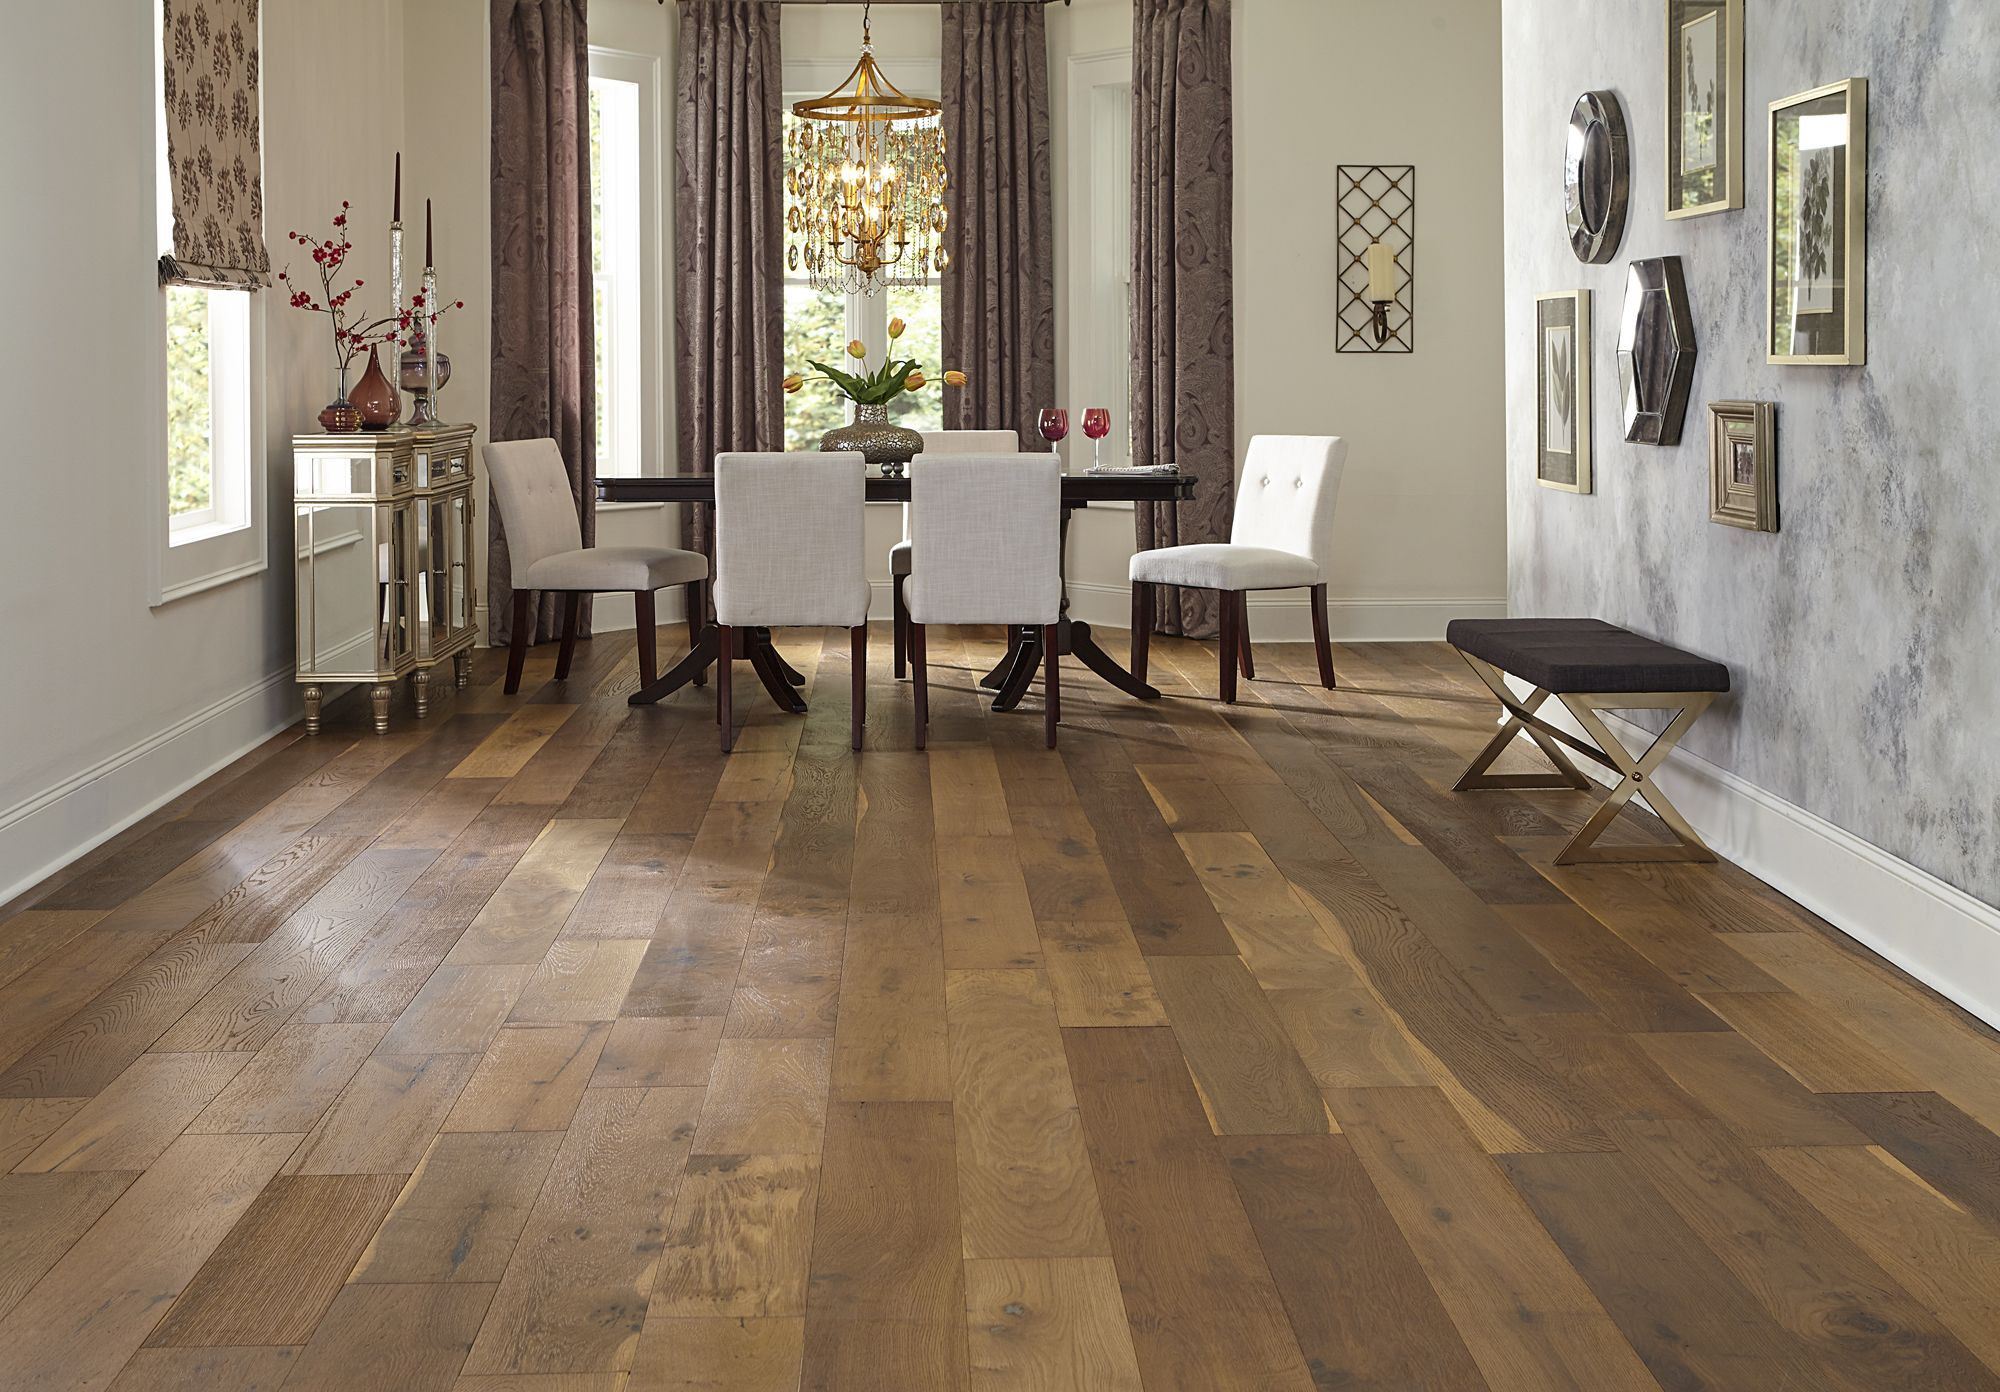 25 Amazing Hardwood Flooring Contractors Richmond Va 2024 free download hardwood flooring contractors richmond va of 7 1 2 wide planks and a rustic look bellawood willow manor oak has in 7 1 2 wide planks and a rustic look bellawood willow manor oak has a storie